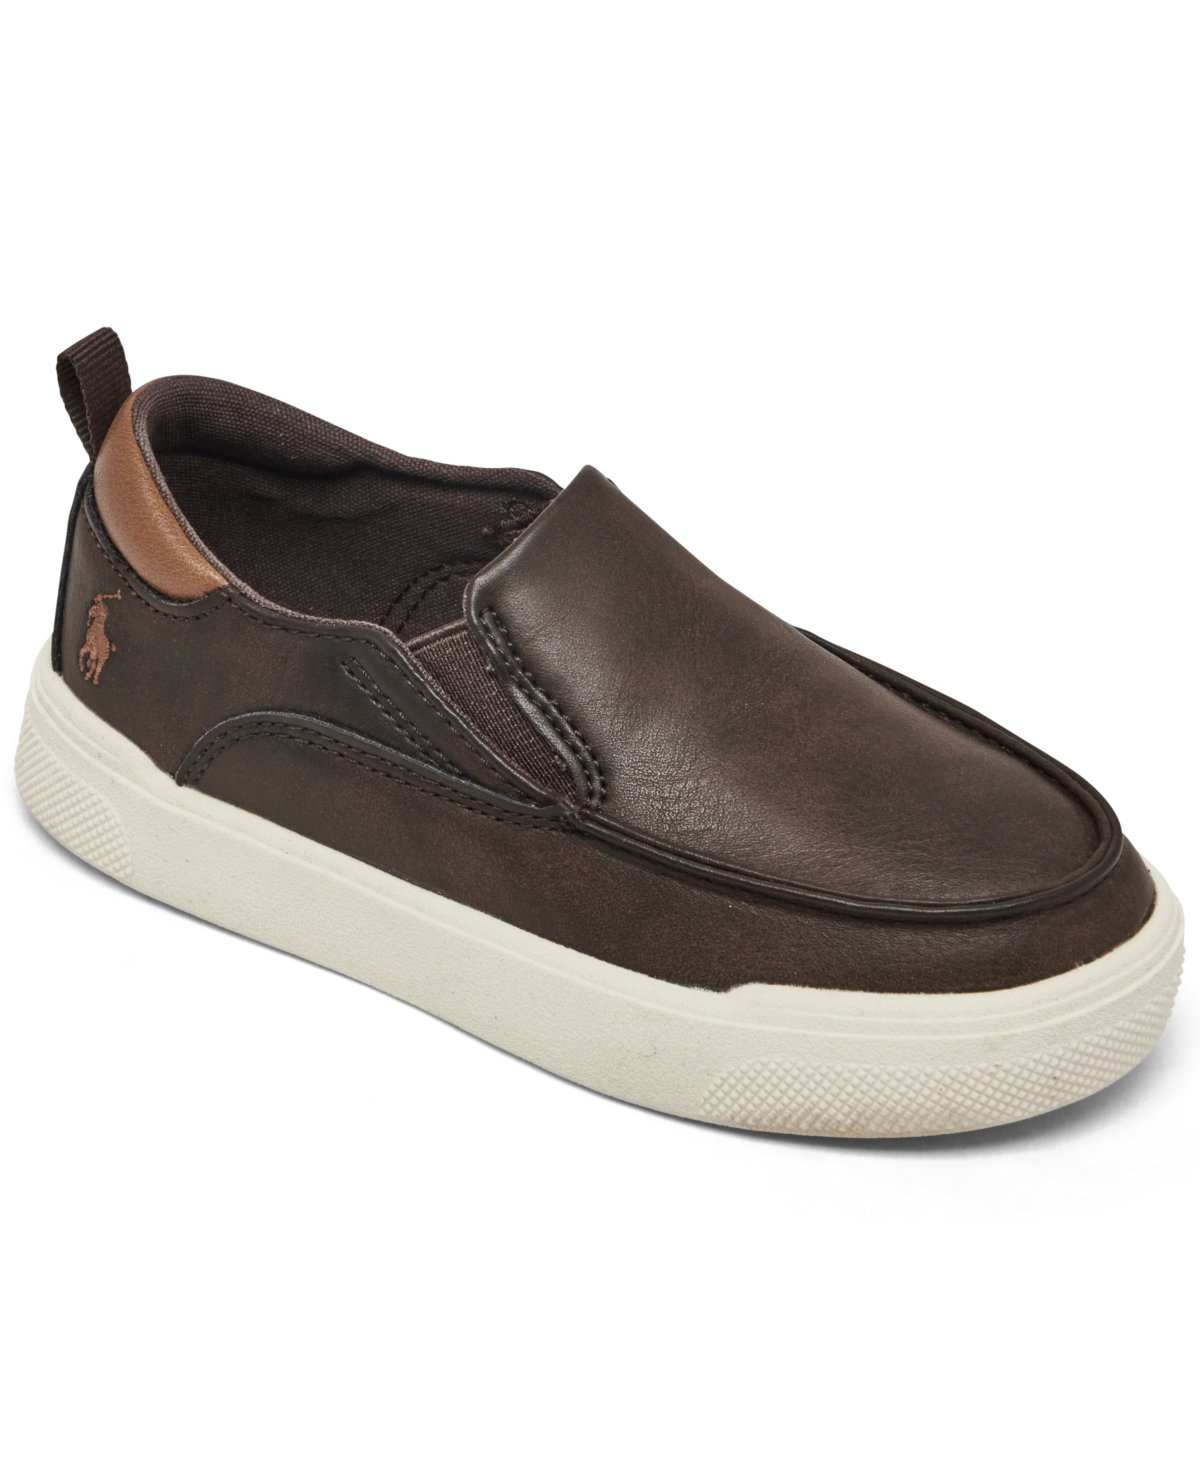 Polo Ralph Lauren Babies' Toddler Kids Filip Slip-on Casual Sneakers From Finish Line In Chocolate